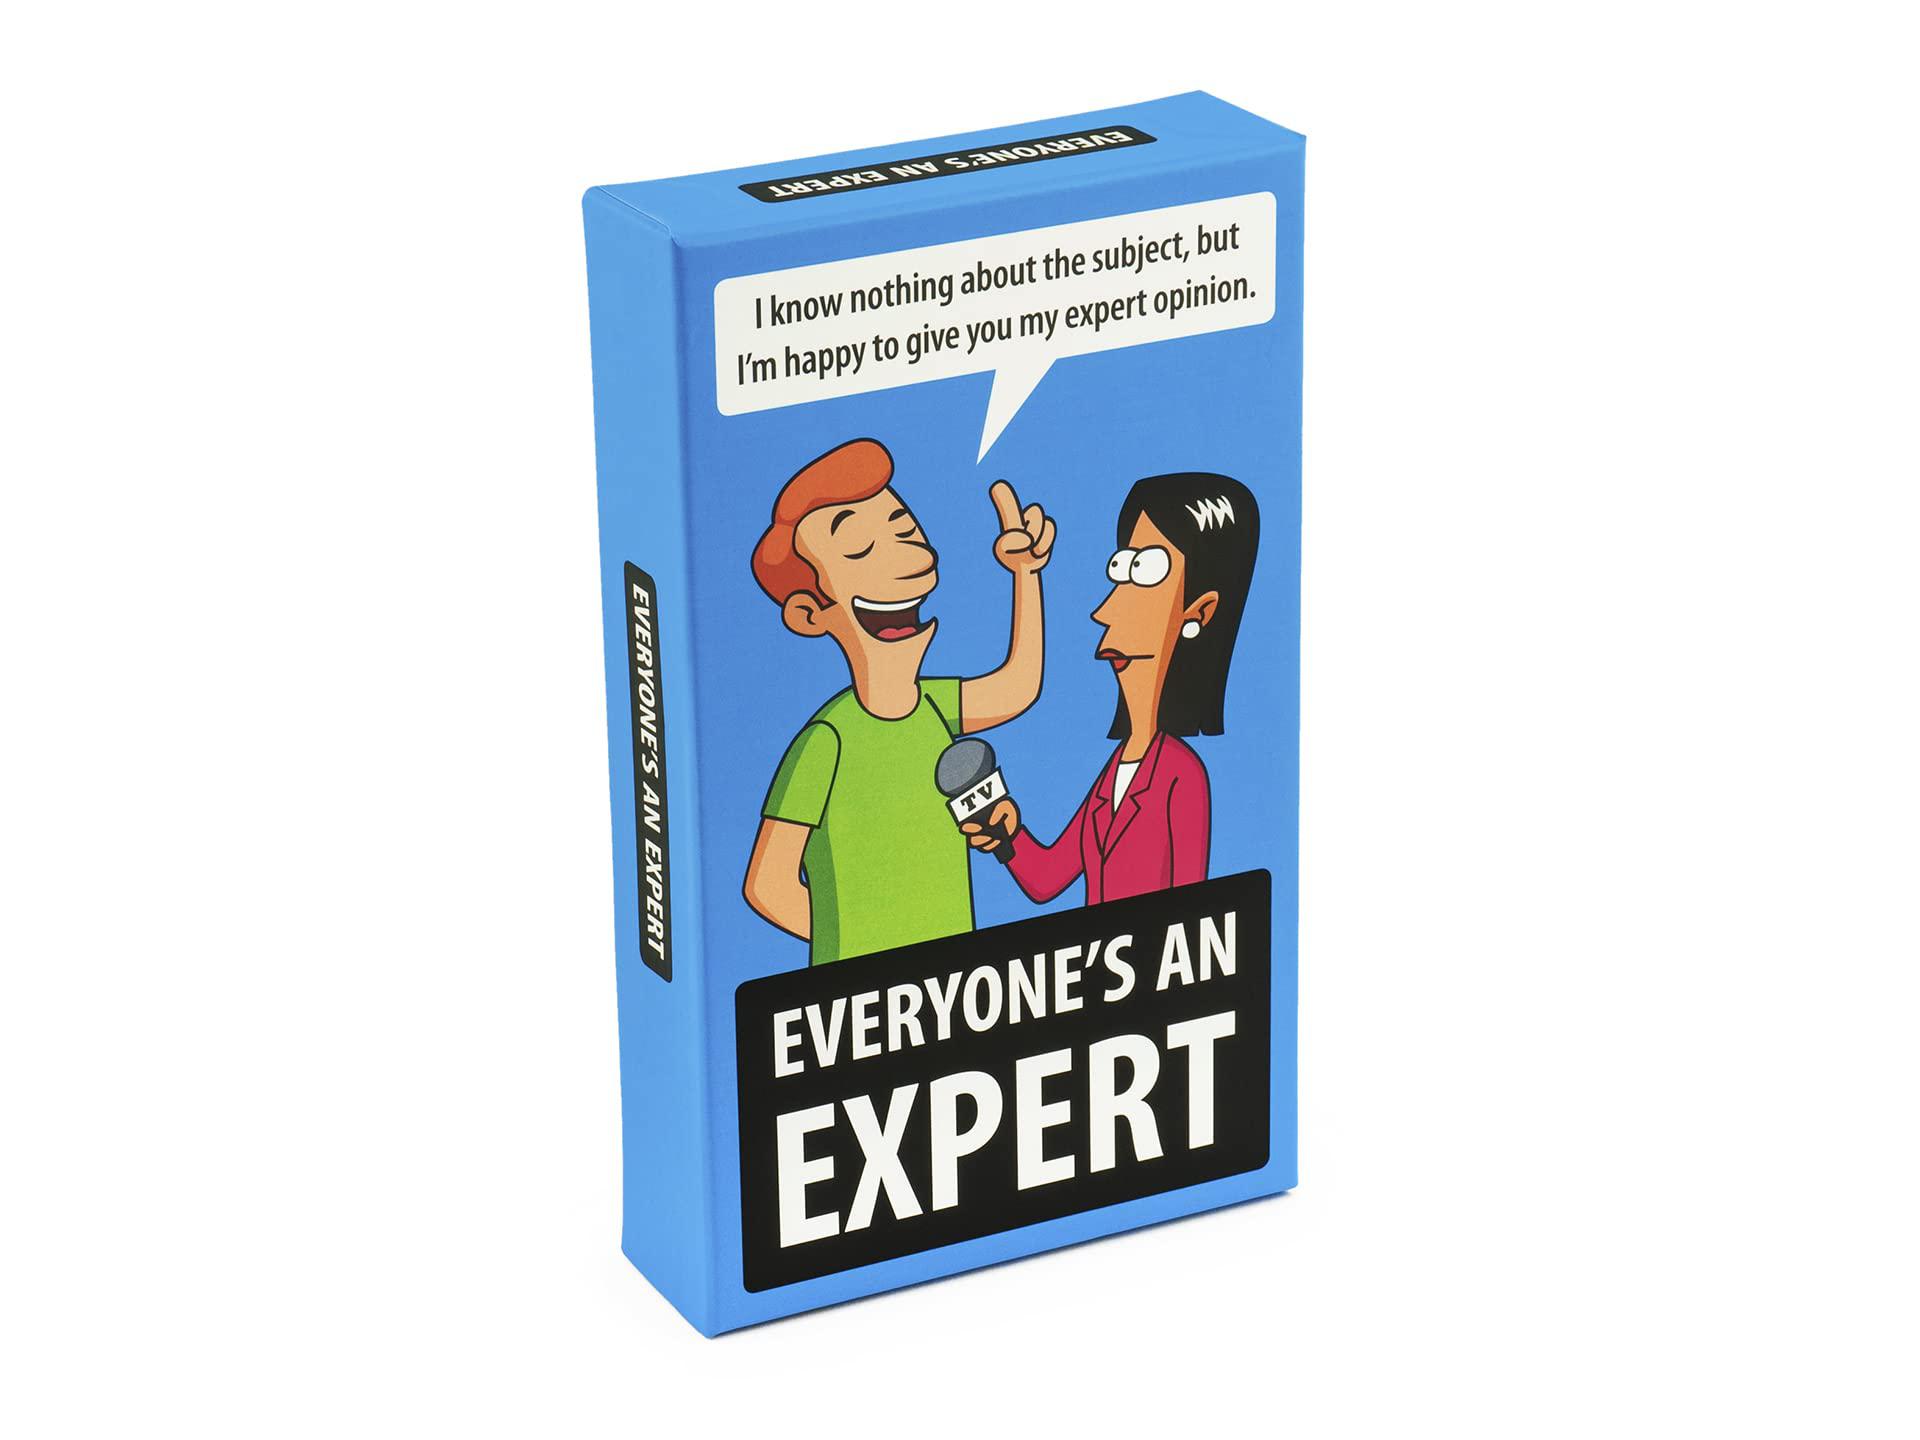 mindmade everyone's an expert - a hilarious and political debate game for know-it-alls